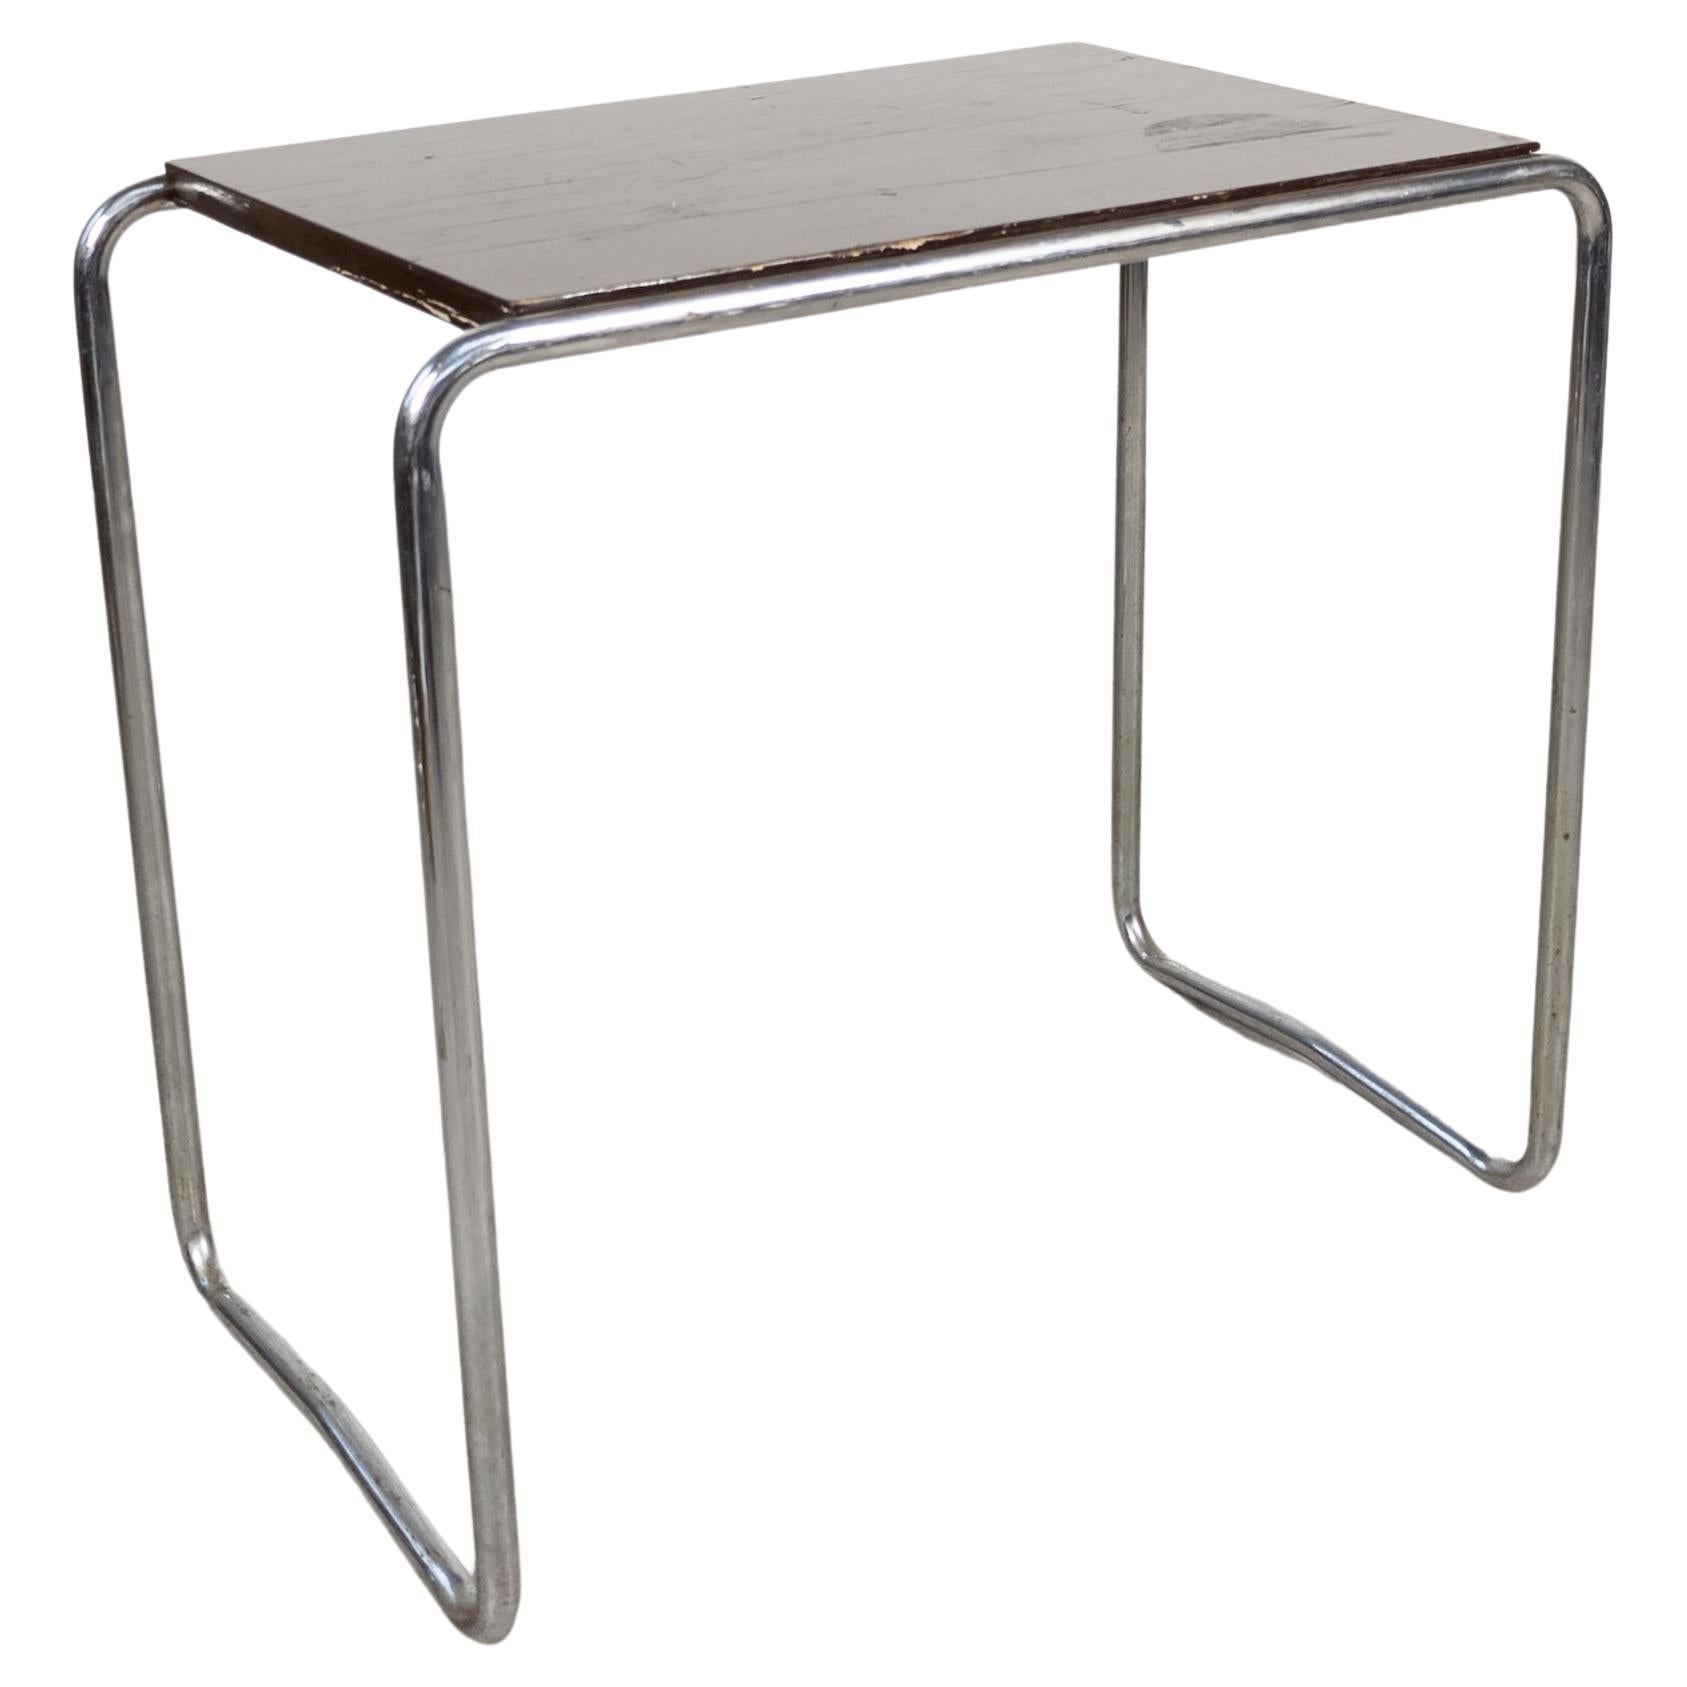 Thonet B 9 Table by Marcel Breuer For Sale